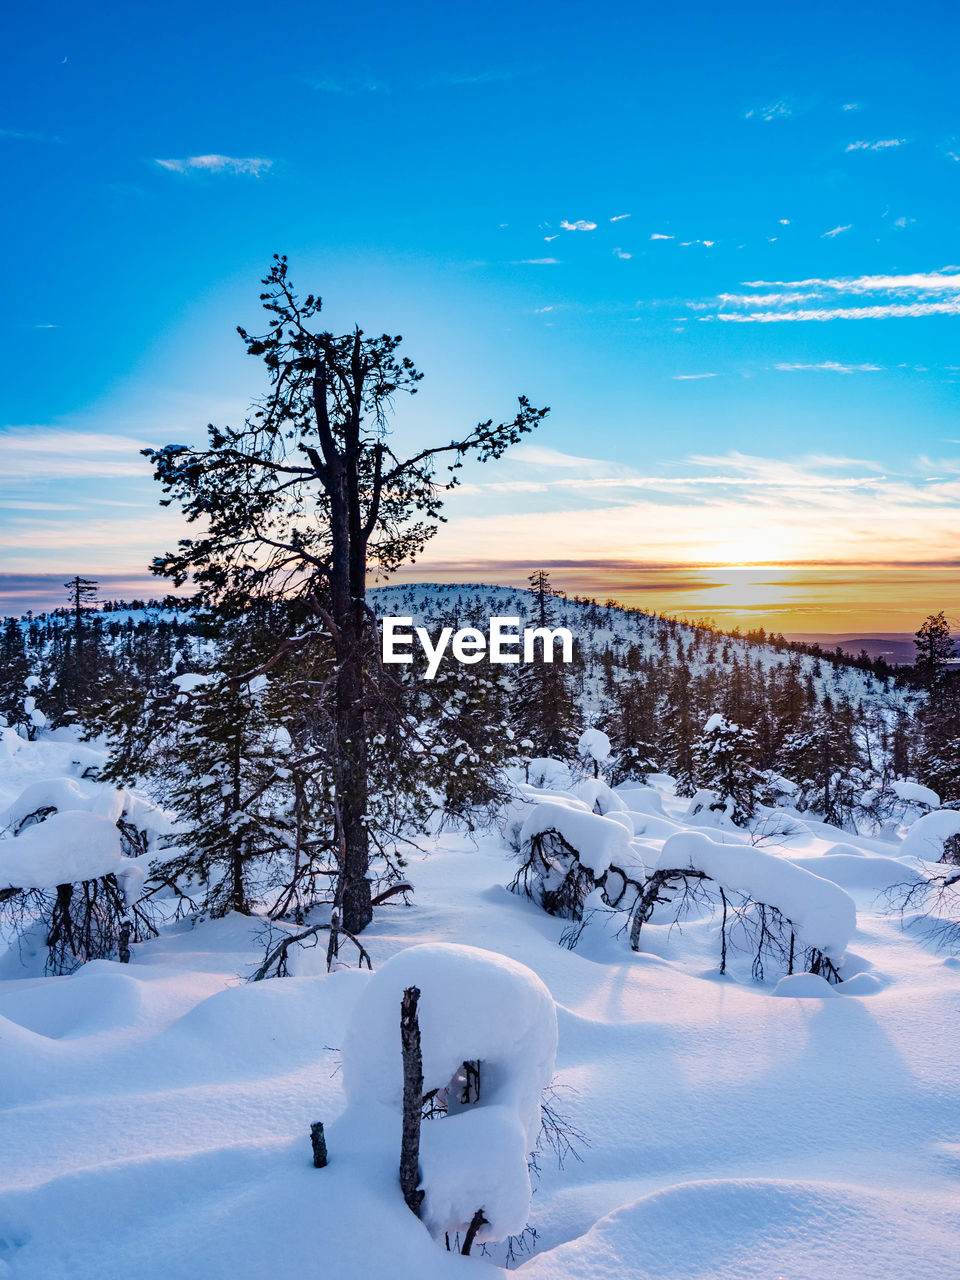 Winter scenery during sunset in snowy lapland, finland